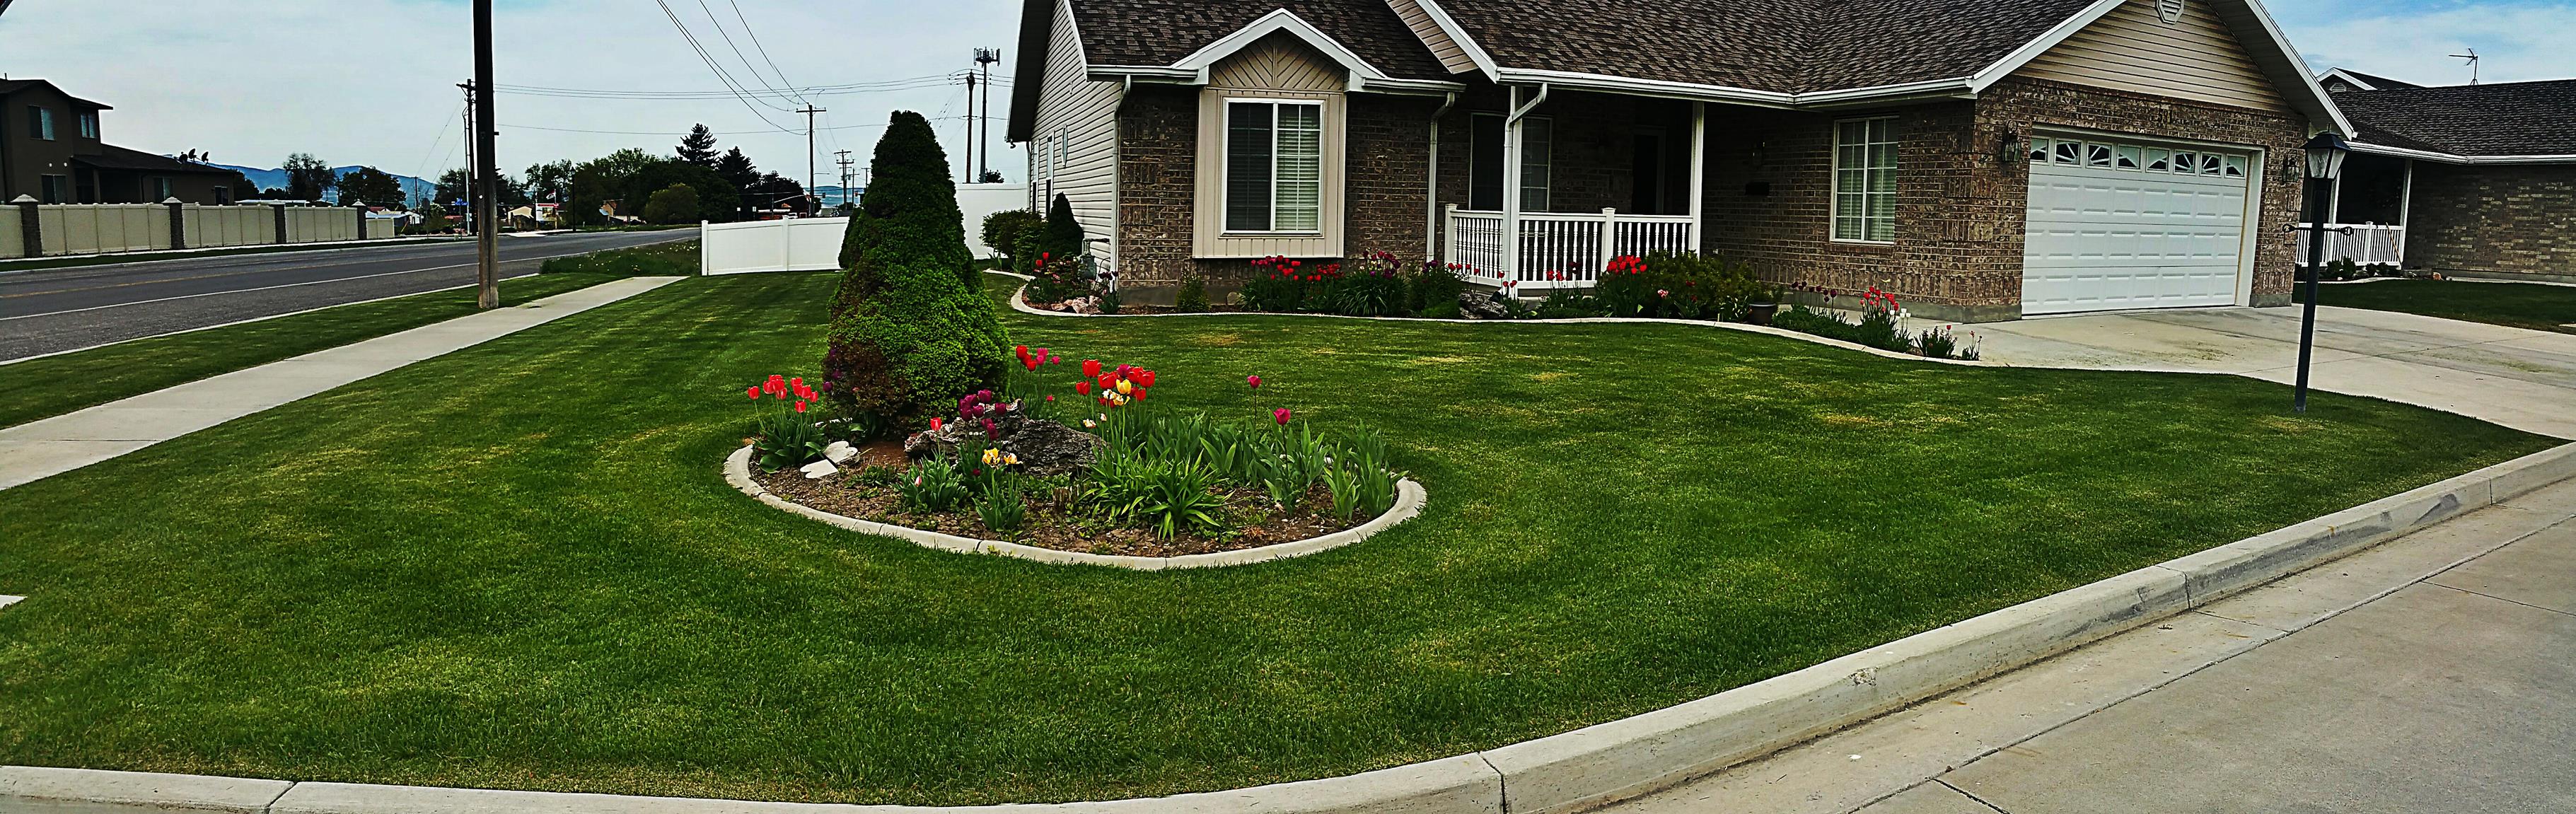 front yard with island of flowers in the middle